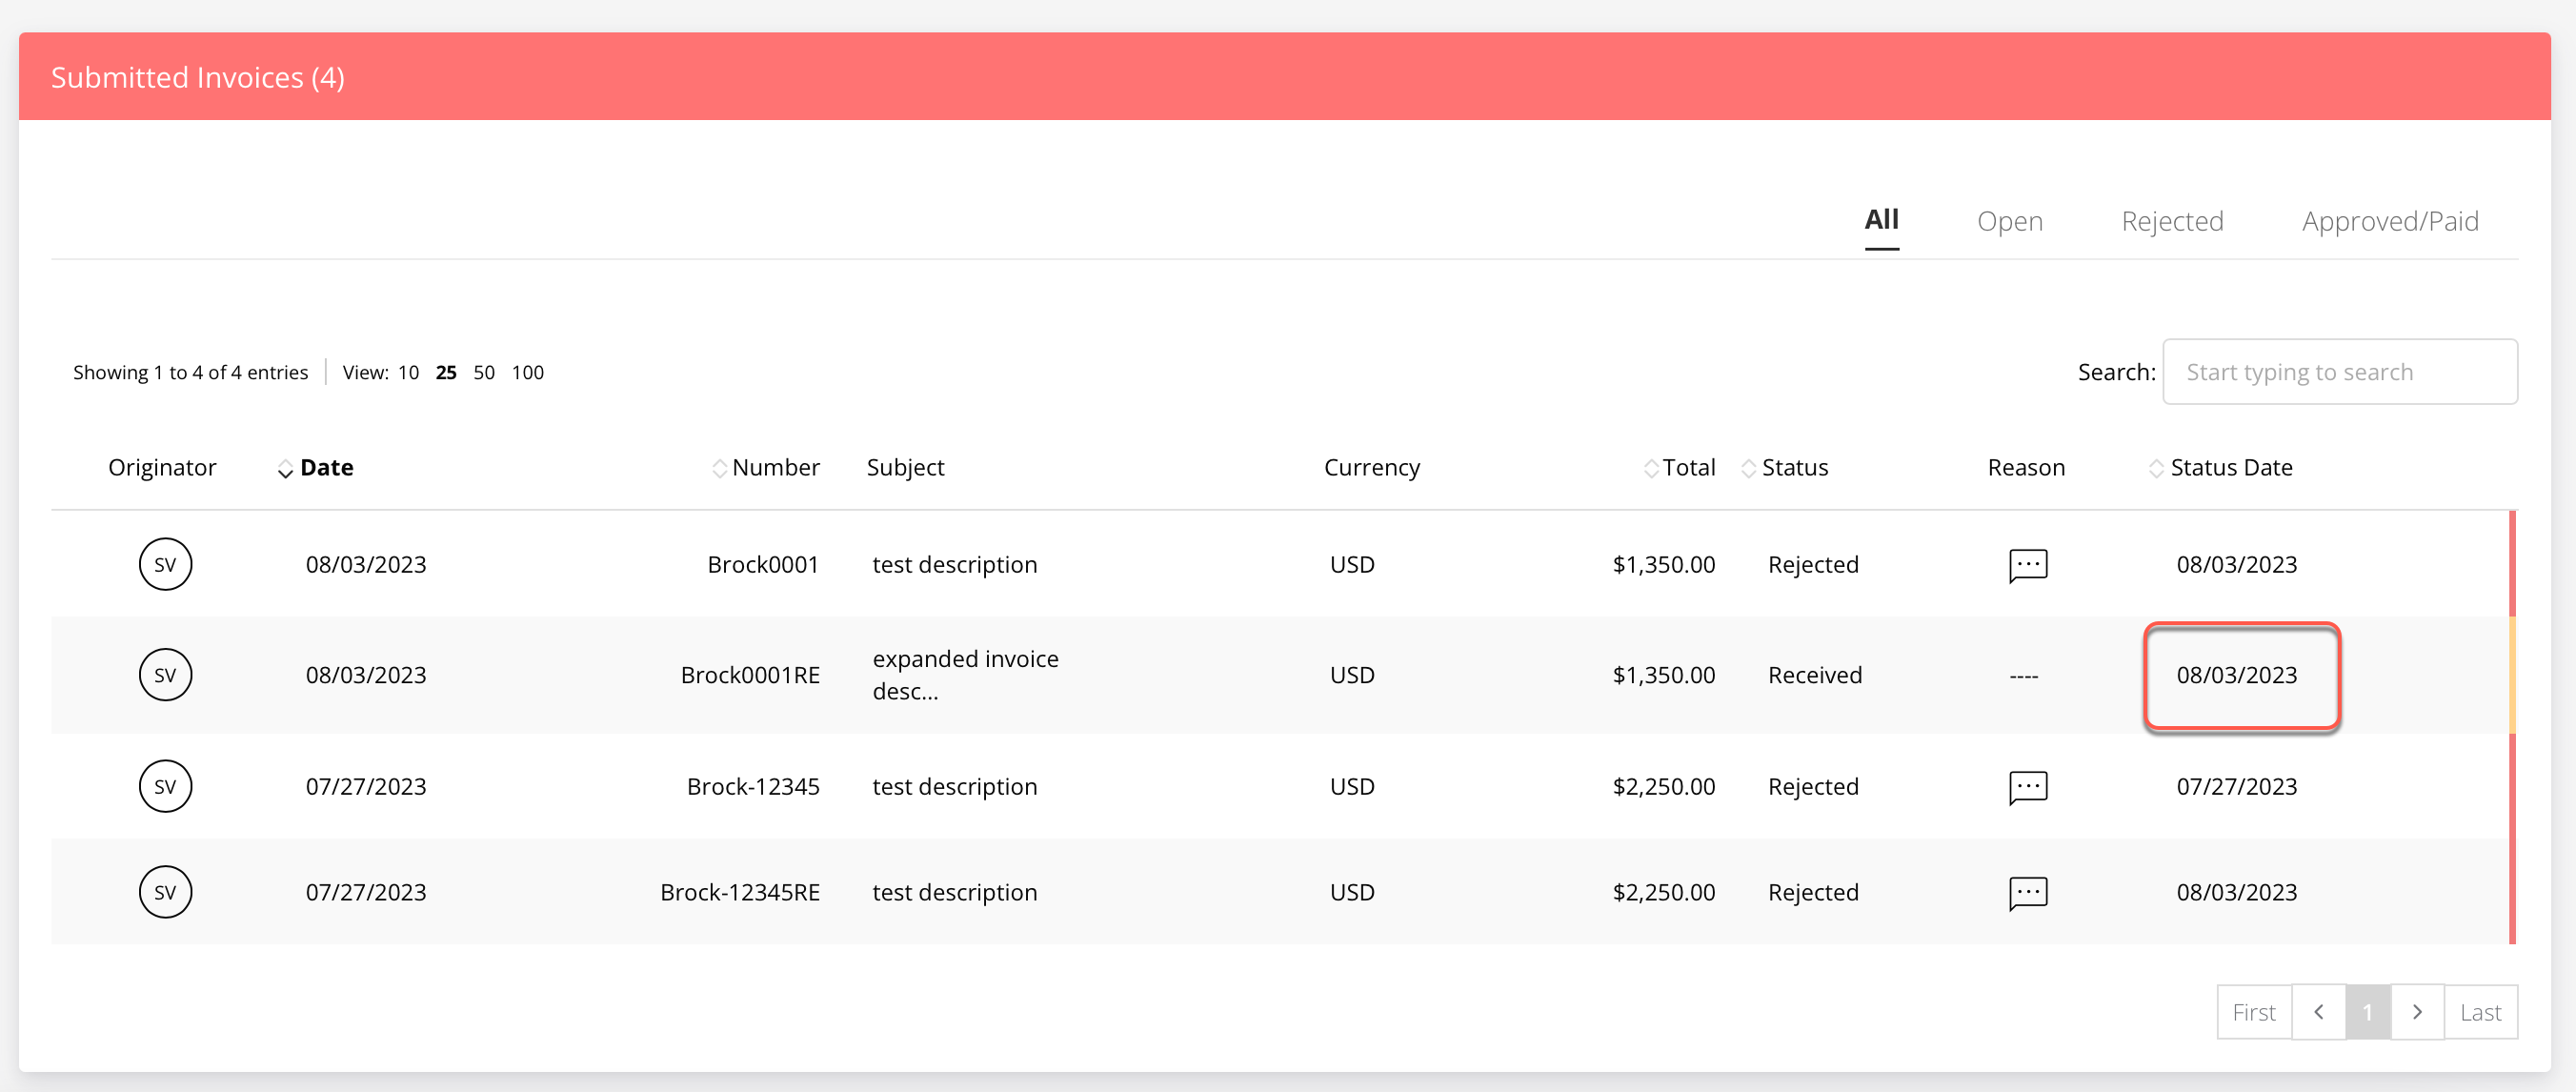 counselgo-status-date-invoices-dashboard0.png